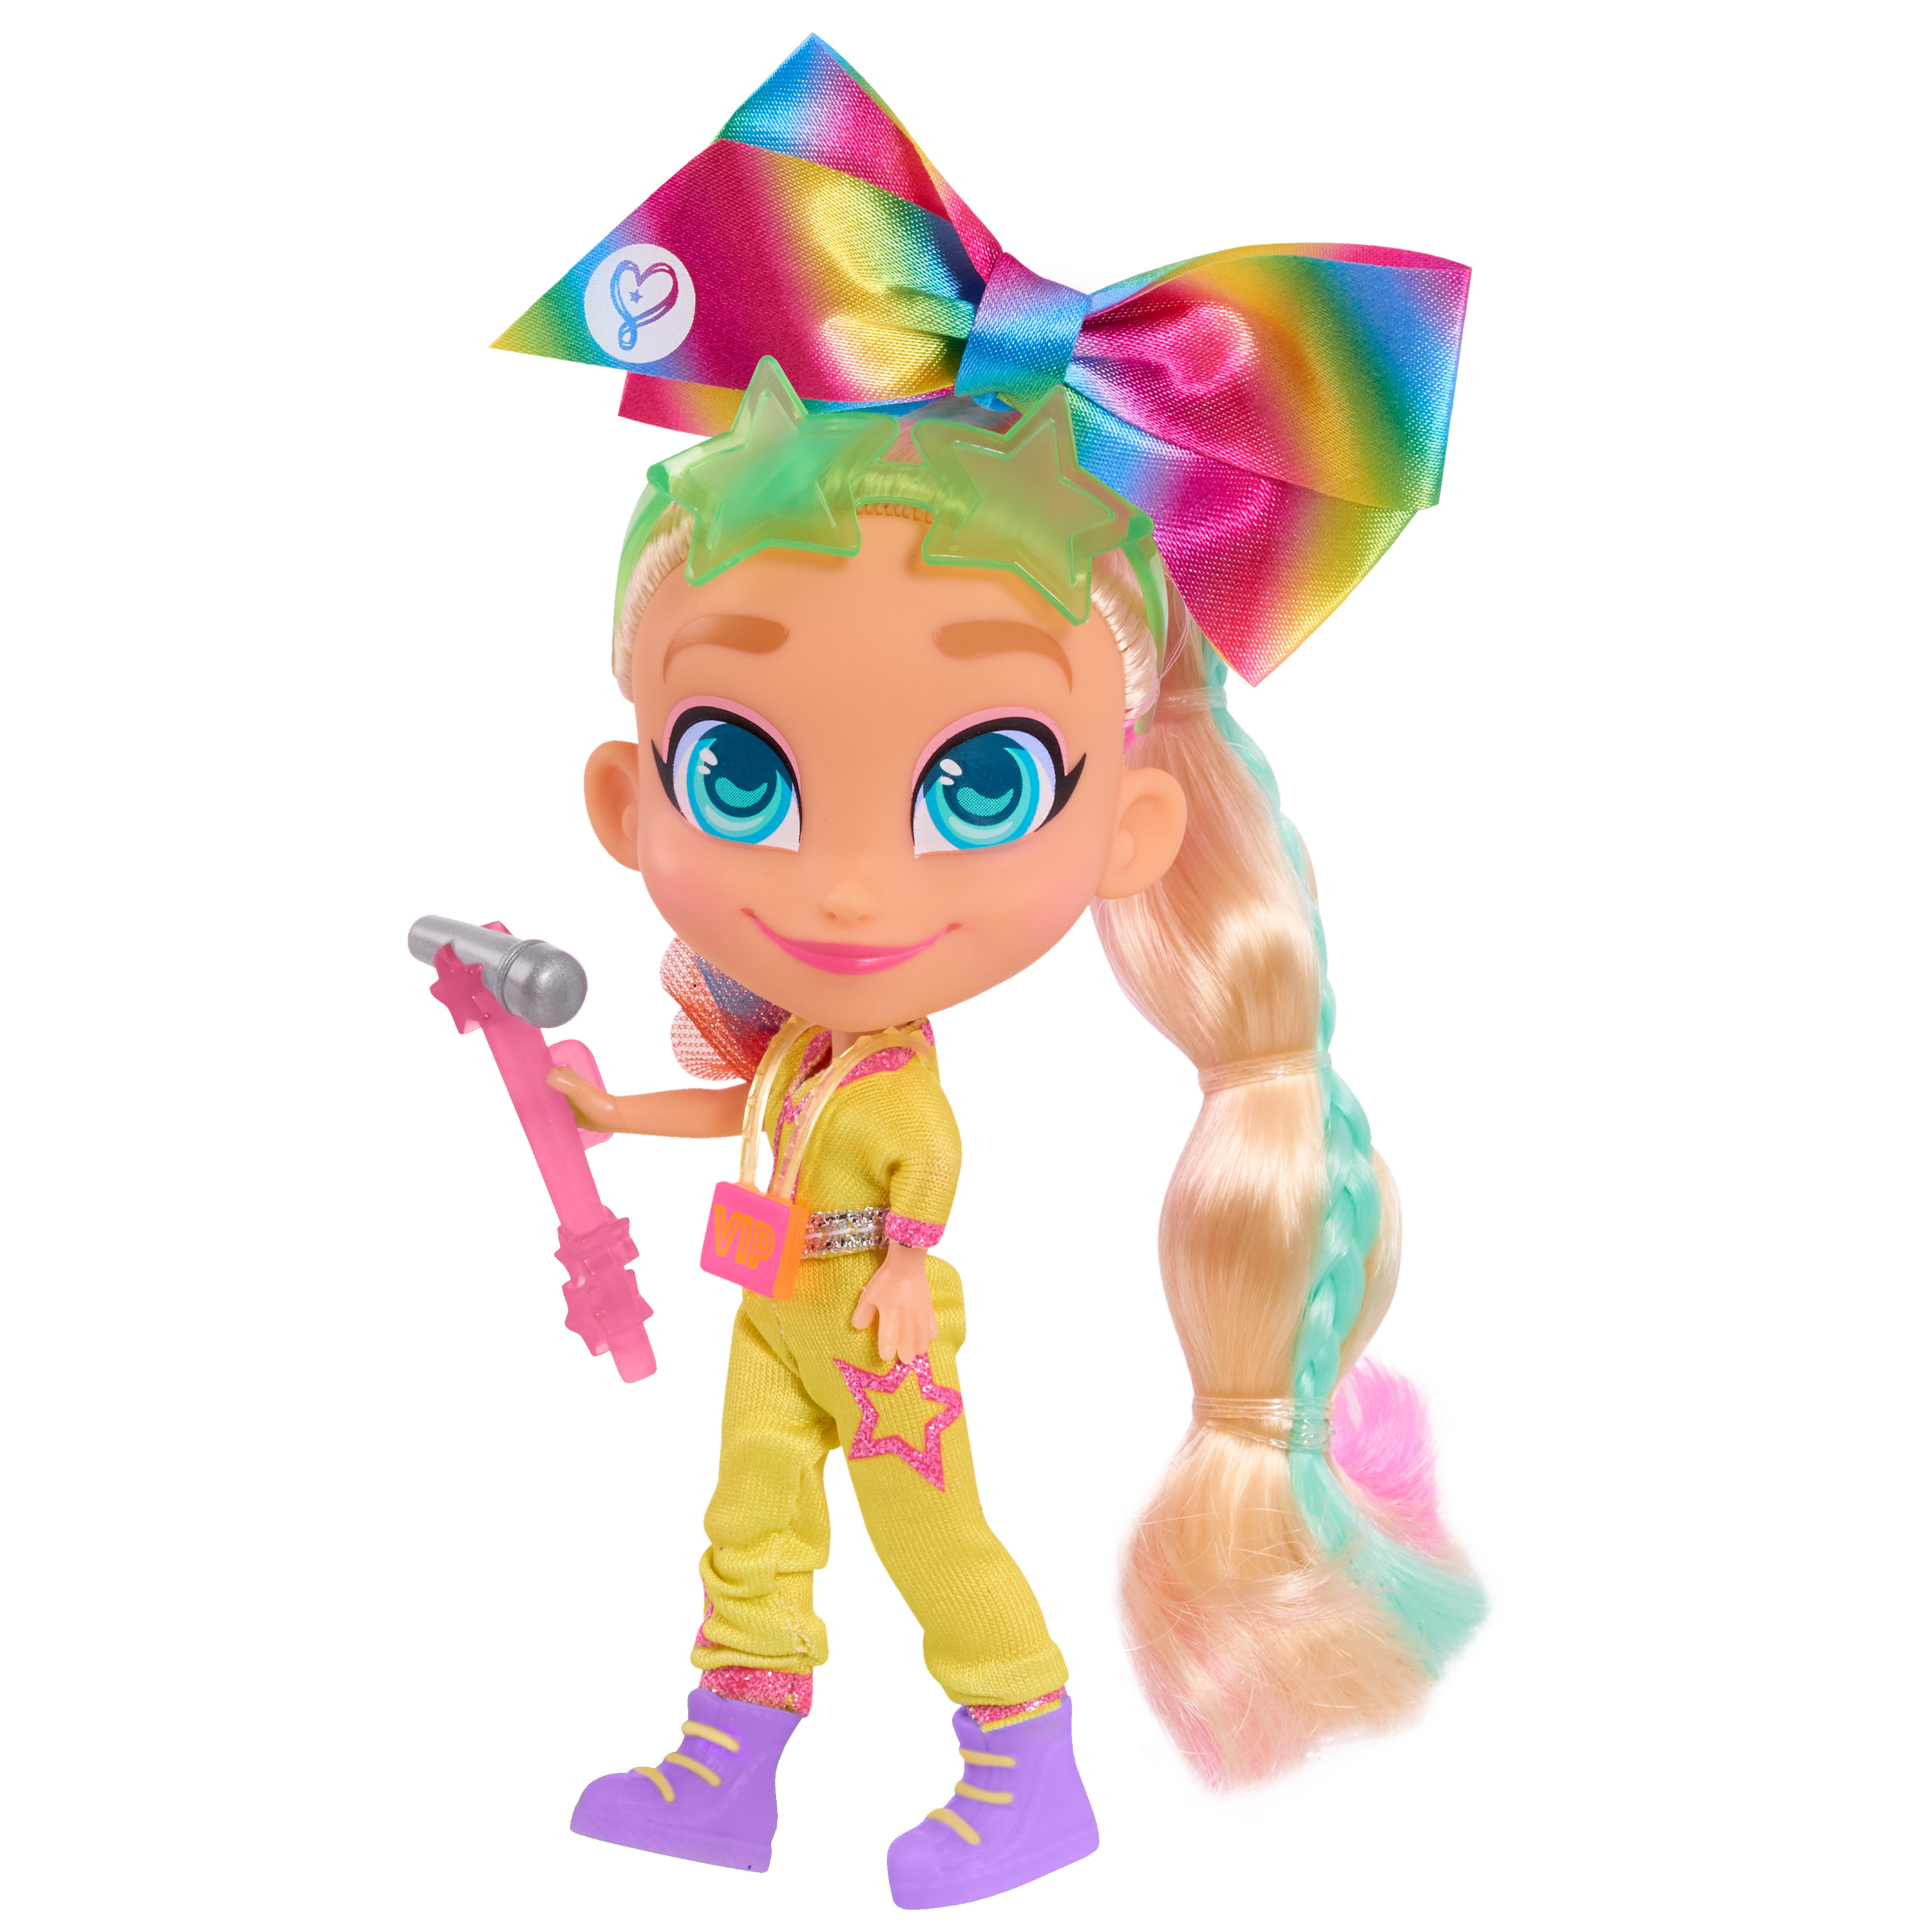 JoJo Siwa JoJo Loves Hairdorables Limited Edition Collectible Doll,  Kids Toys for Ages 3 Up, Gifts and Presents - image 1 of 2